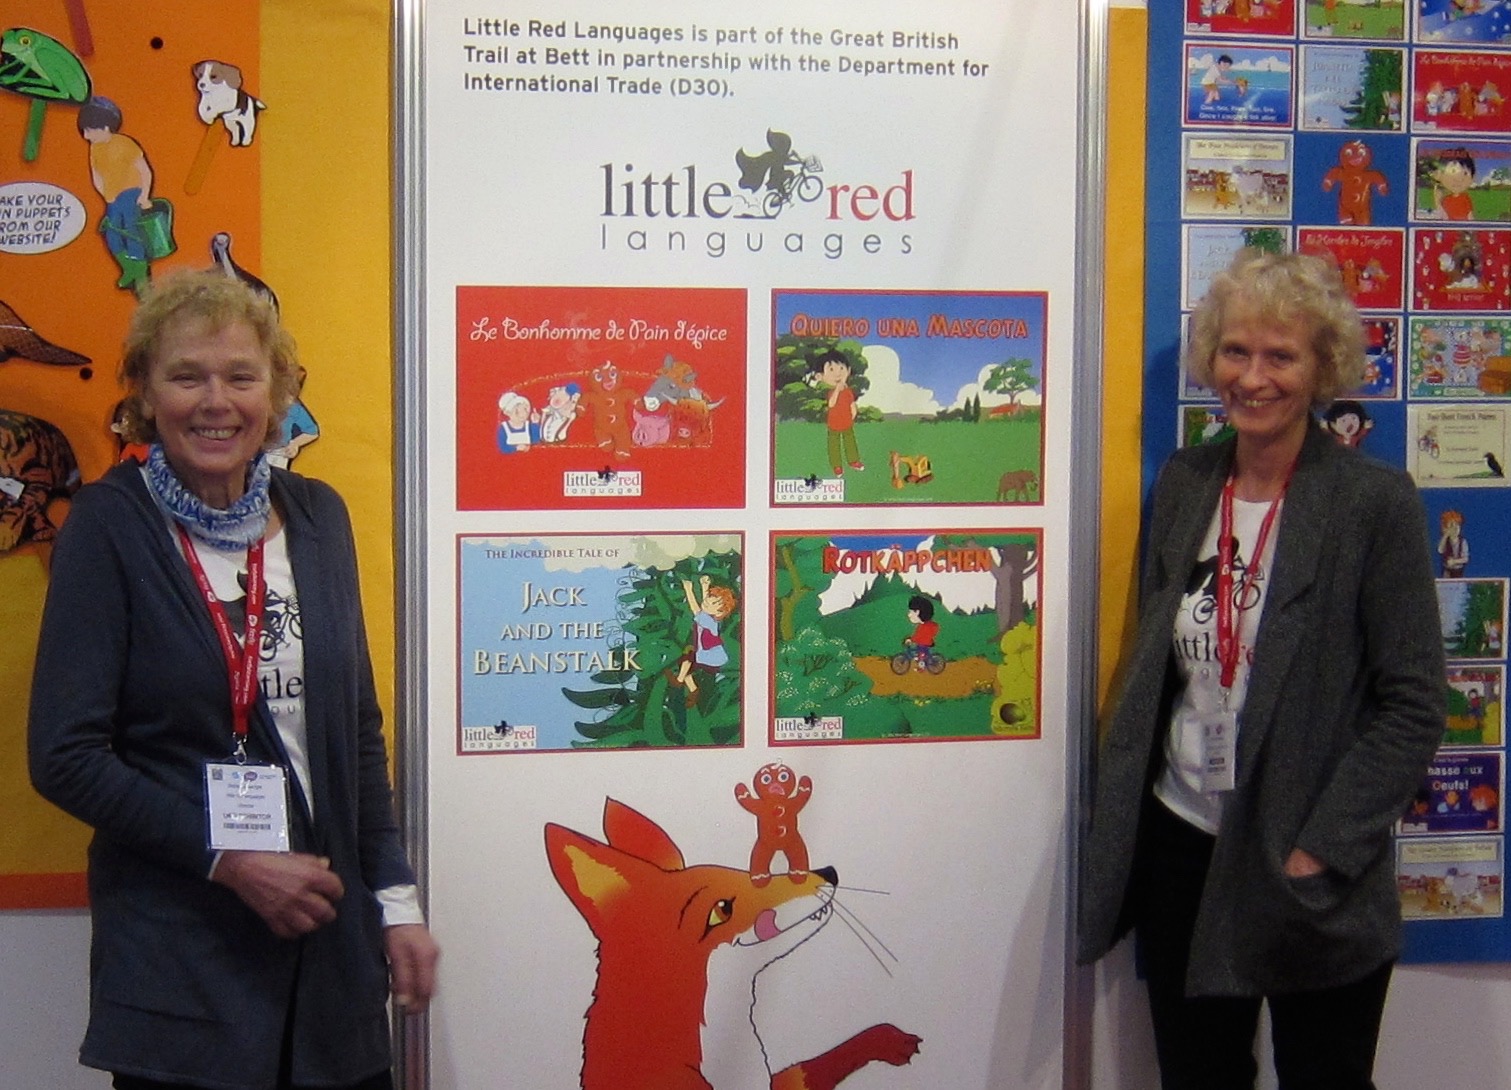 Little Red Languages at the Bett Show